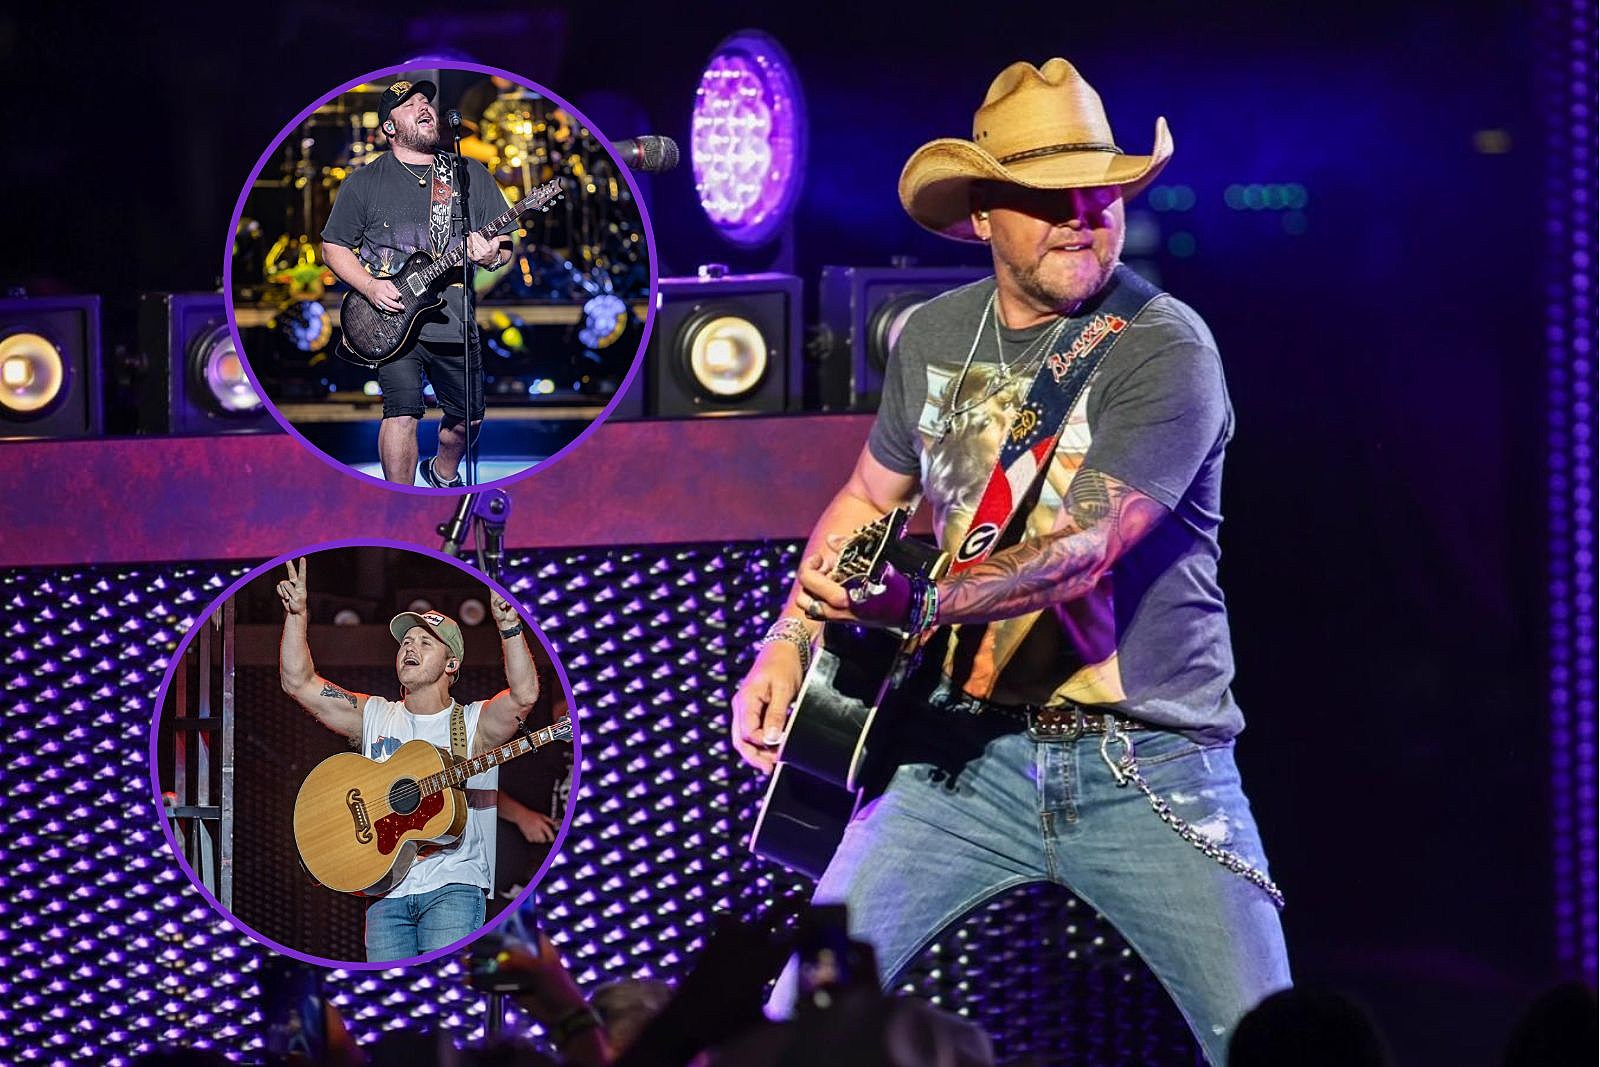 Night Train Tour With Jason Aldean On Track For SPAC [VIDEO]